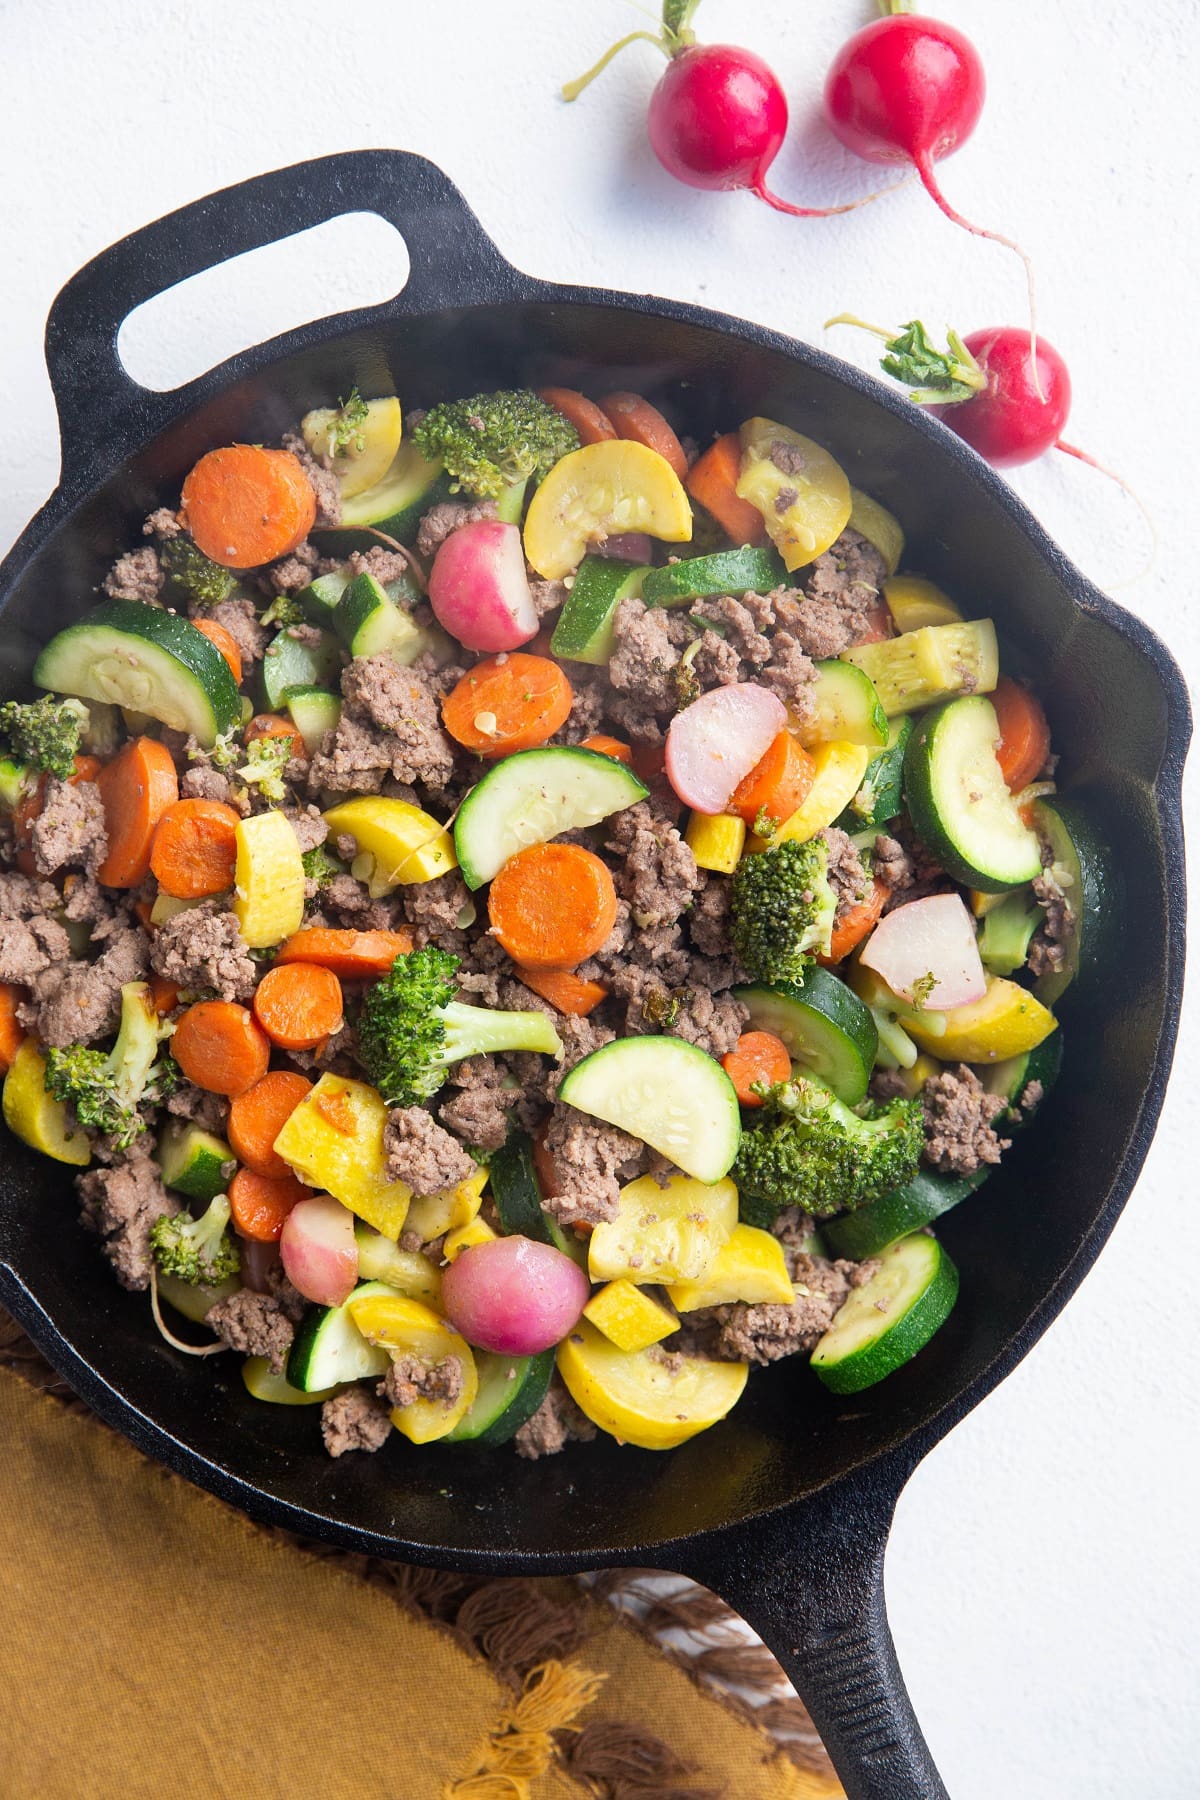 https://www.theroastedroot.net/wp-content/uploads/2018/08/vegetable-and-ground-beef-skillet-5.jpg